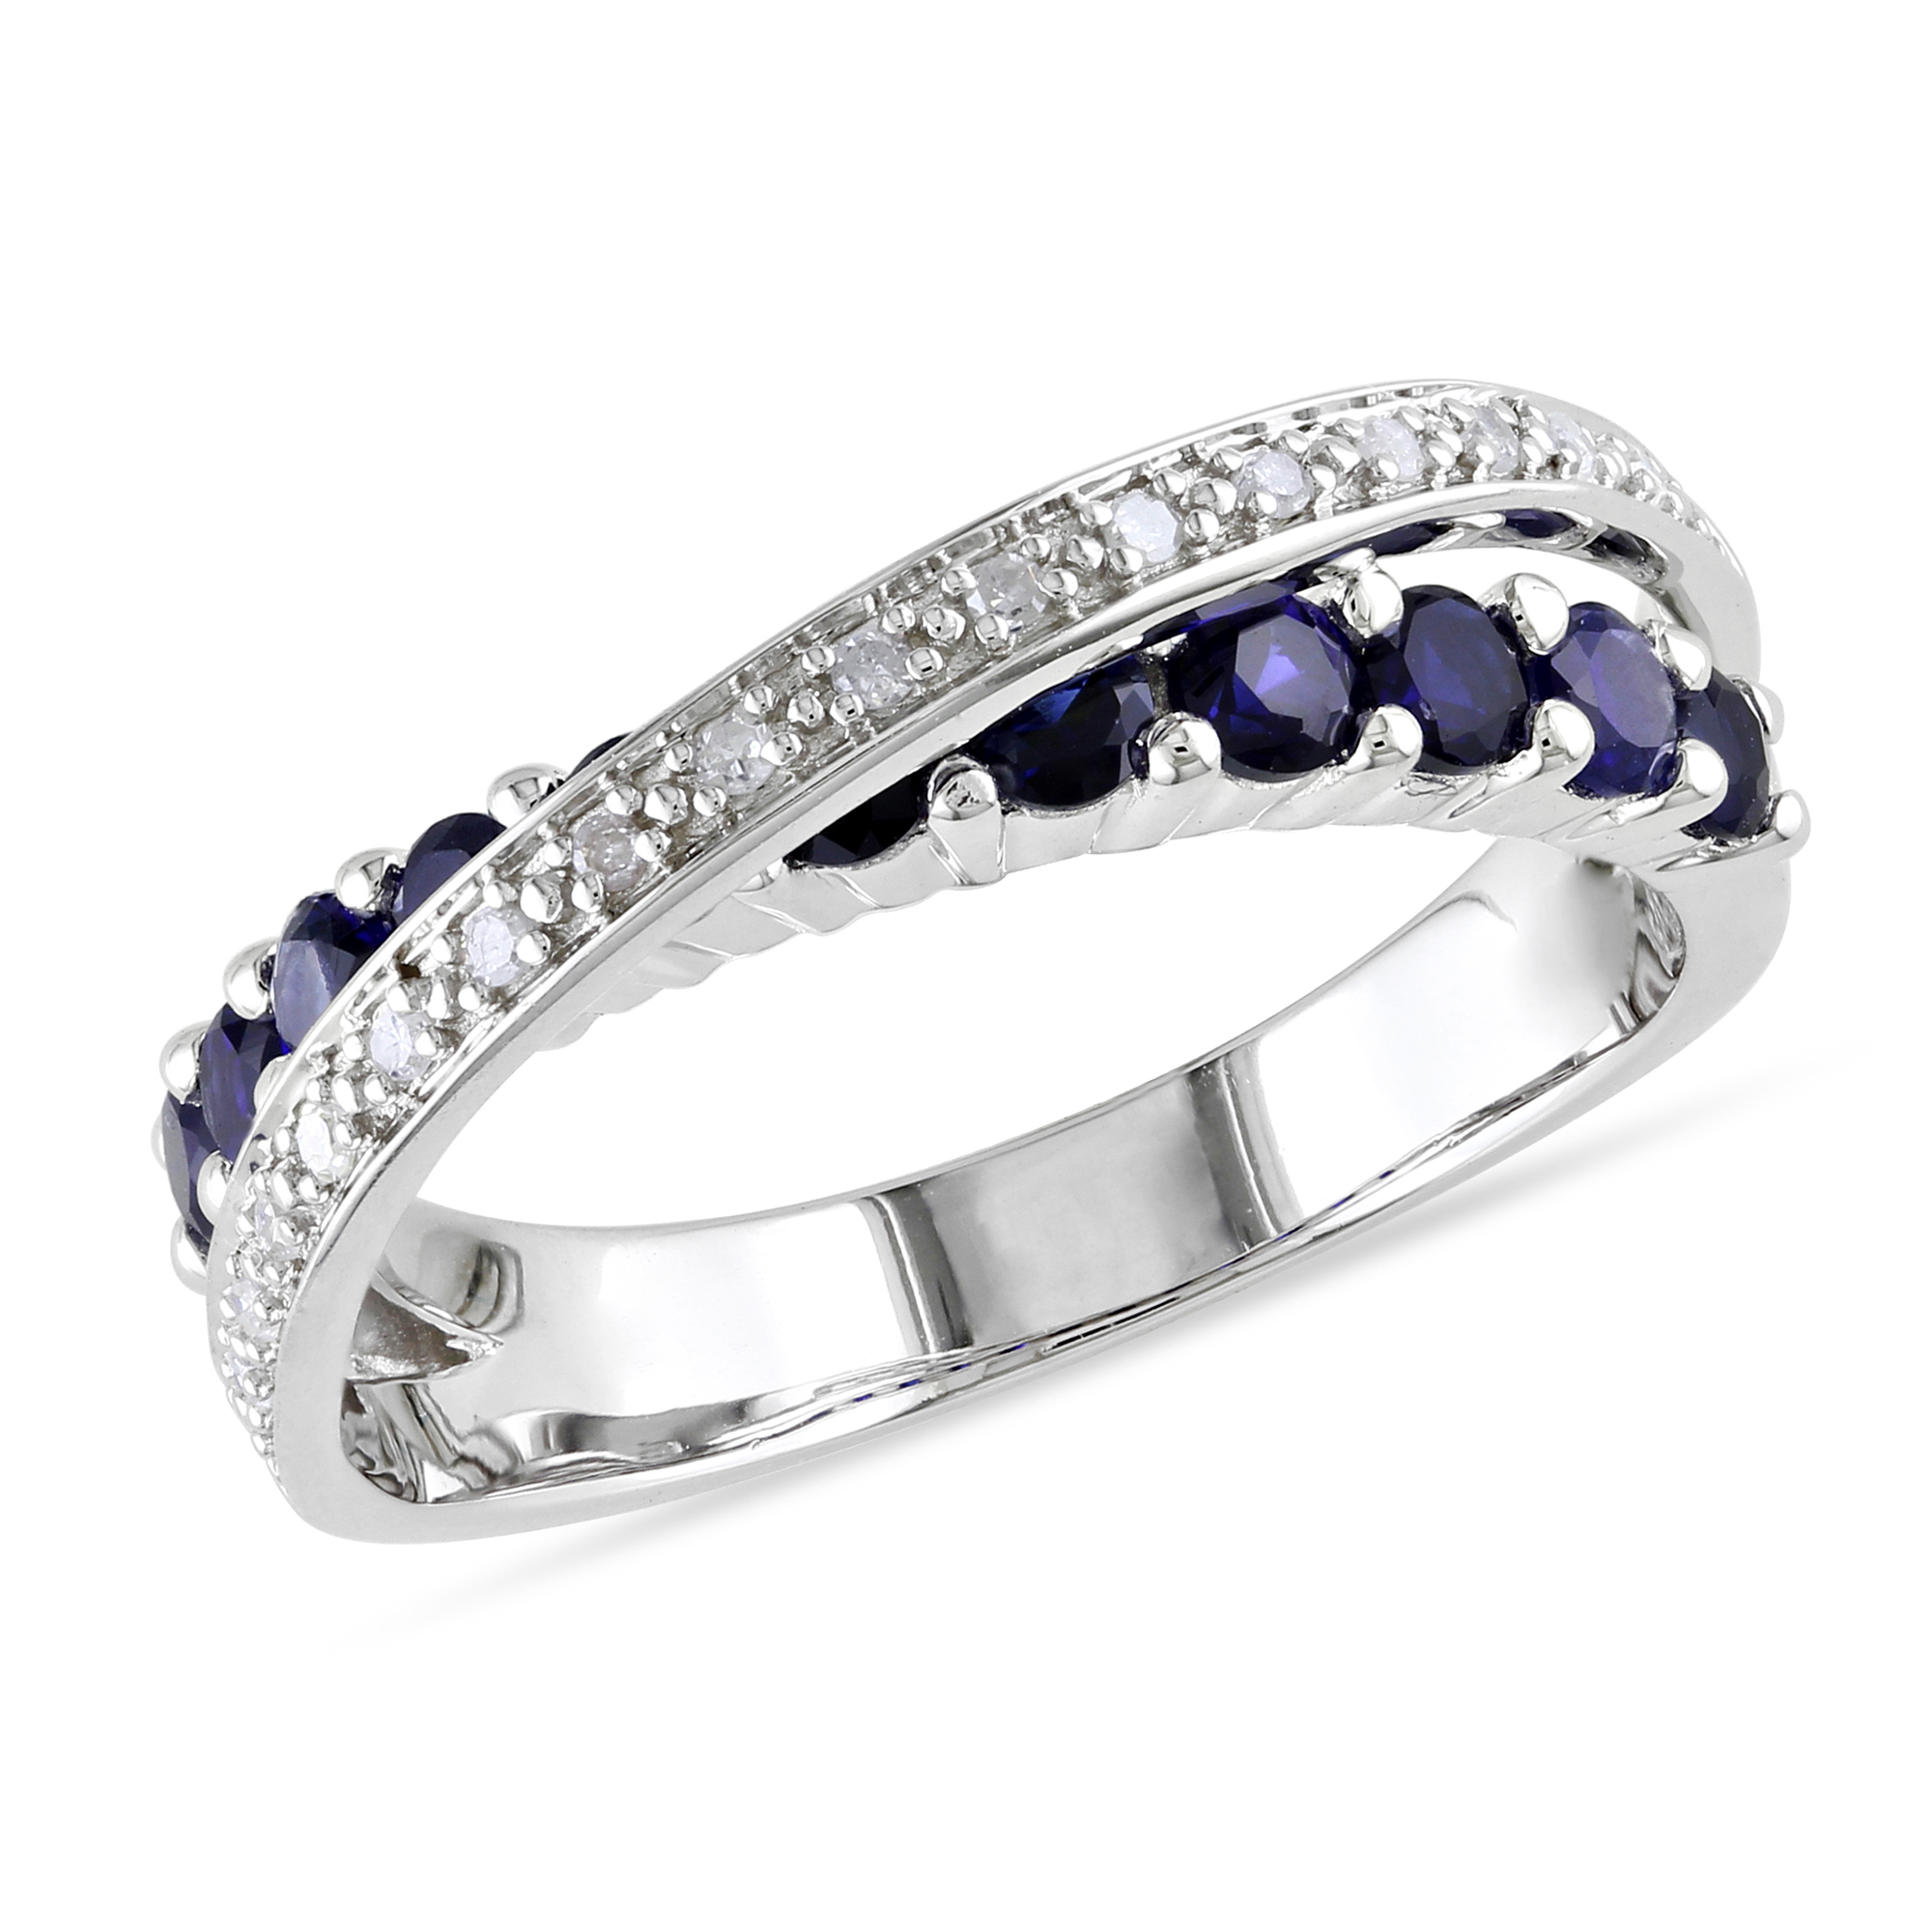 Amour 1/10 Carat T.W. Diamond and 1 Carat T.G.W. Created Blue Sapphire Fashion Ring in Sterling Silver GH I3